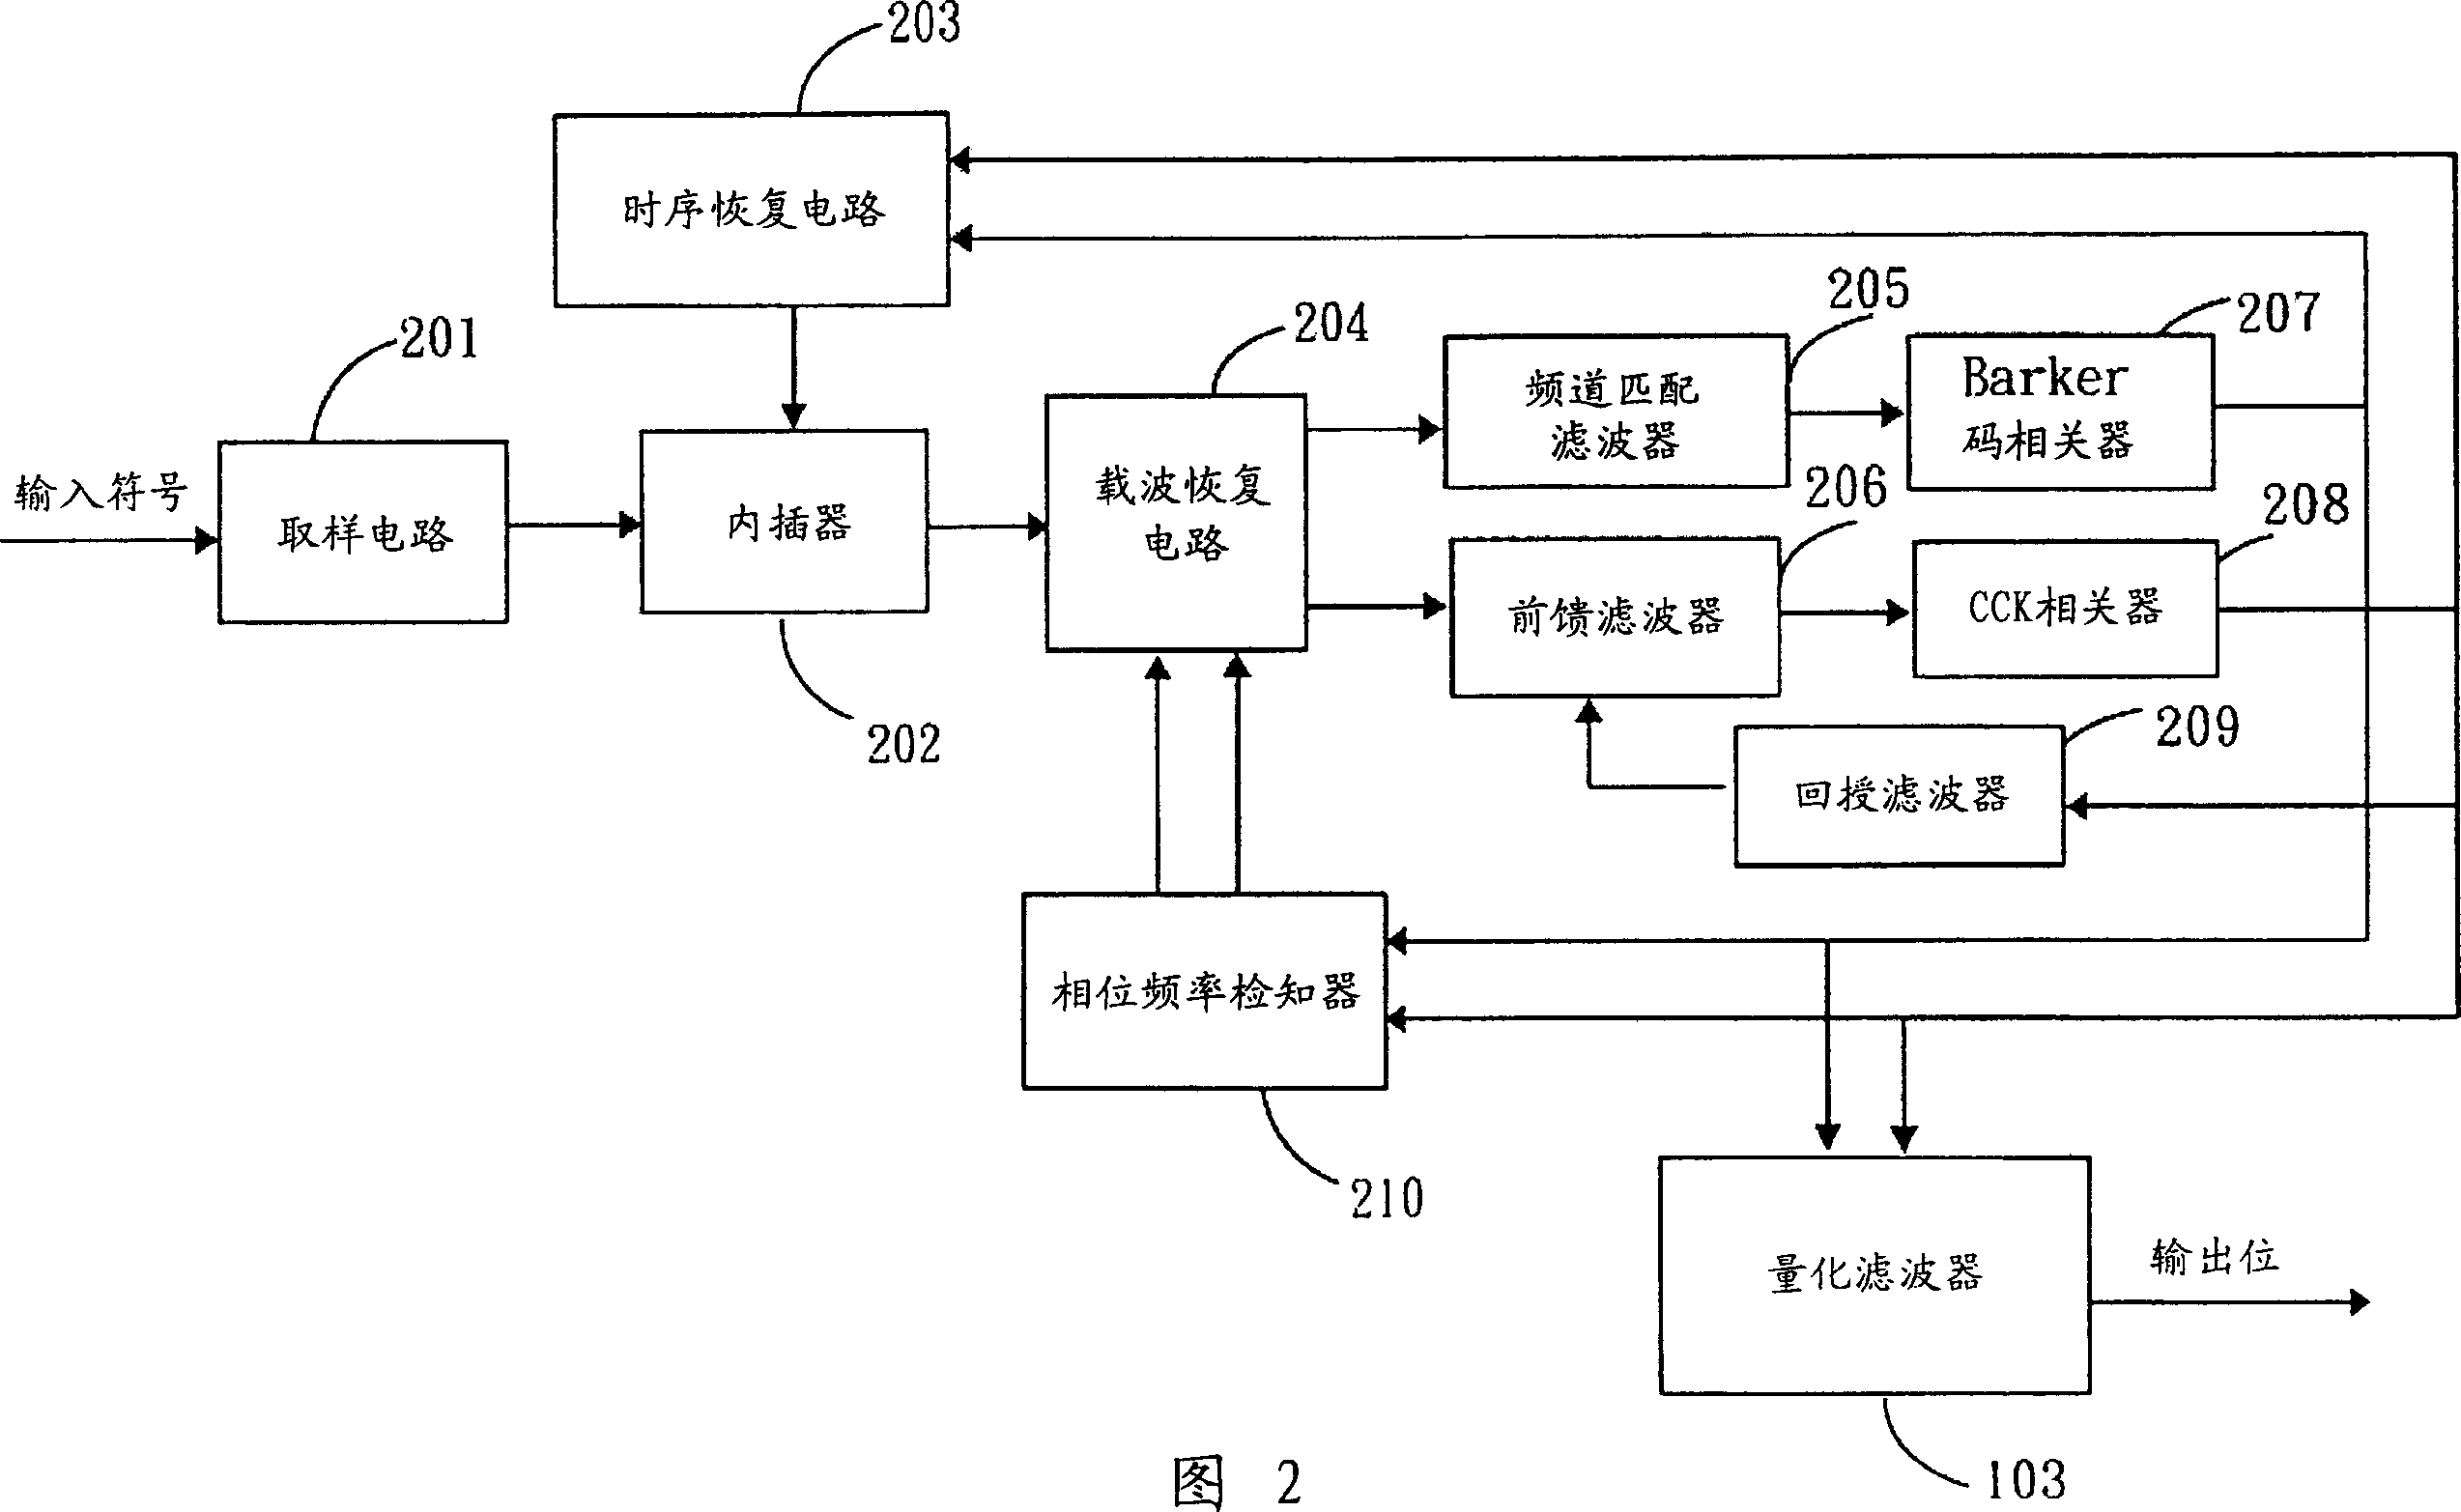 Digital receiver of modulated signal capable of processing various kinds of data rate